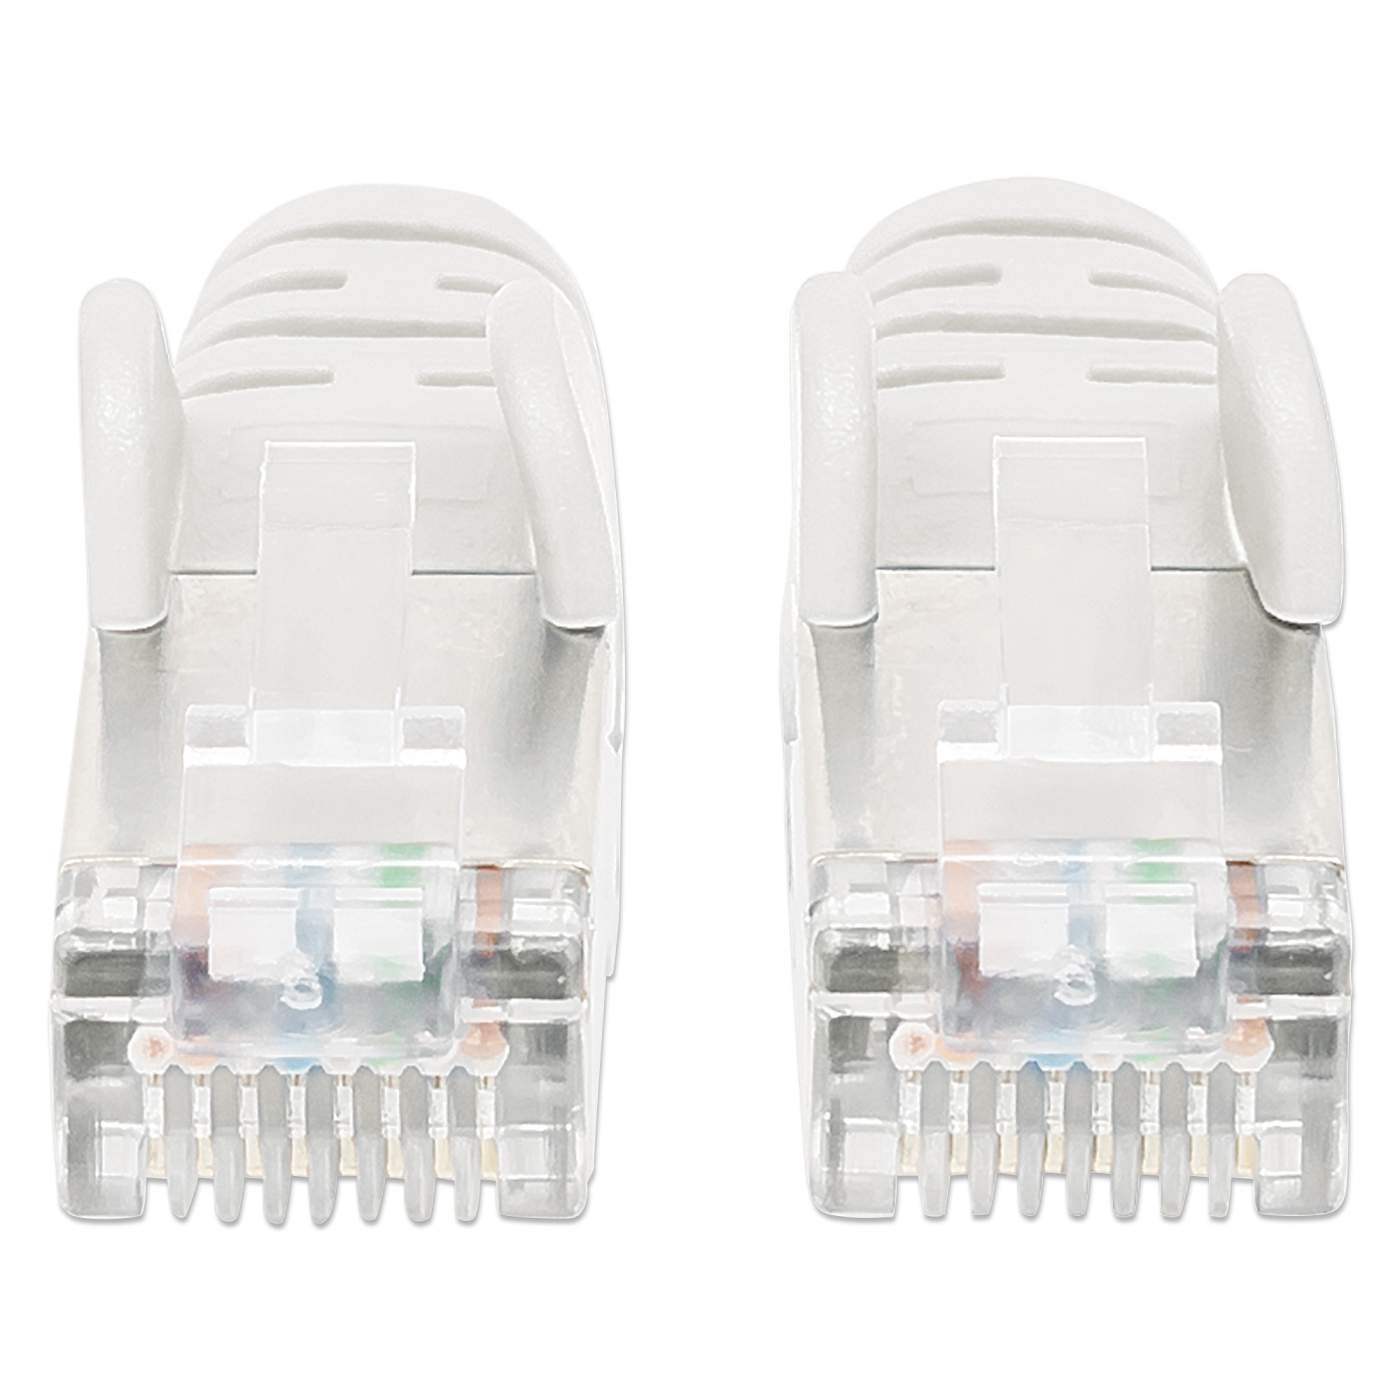 Cat6a S/FTP Network Patch Cable, 7 ft., White Image 3